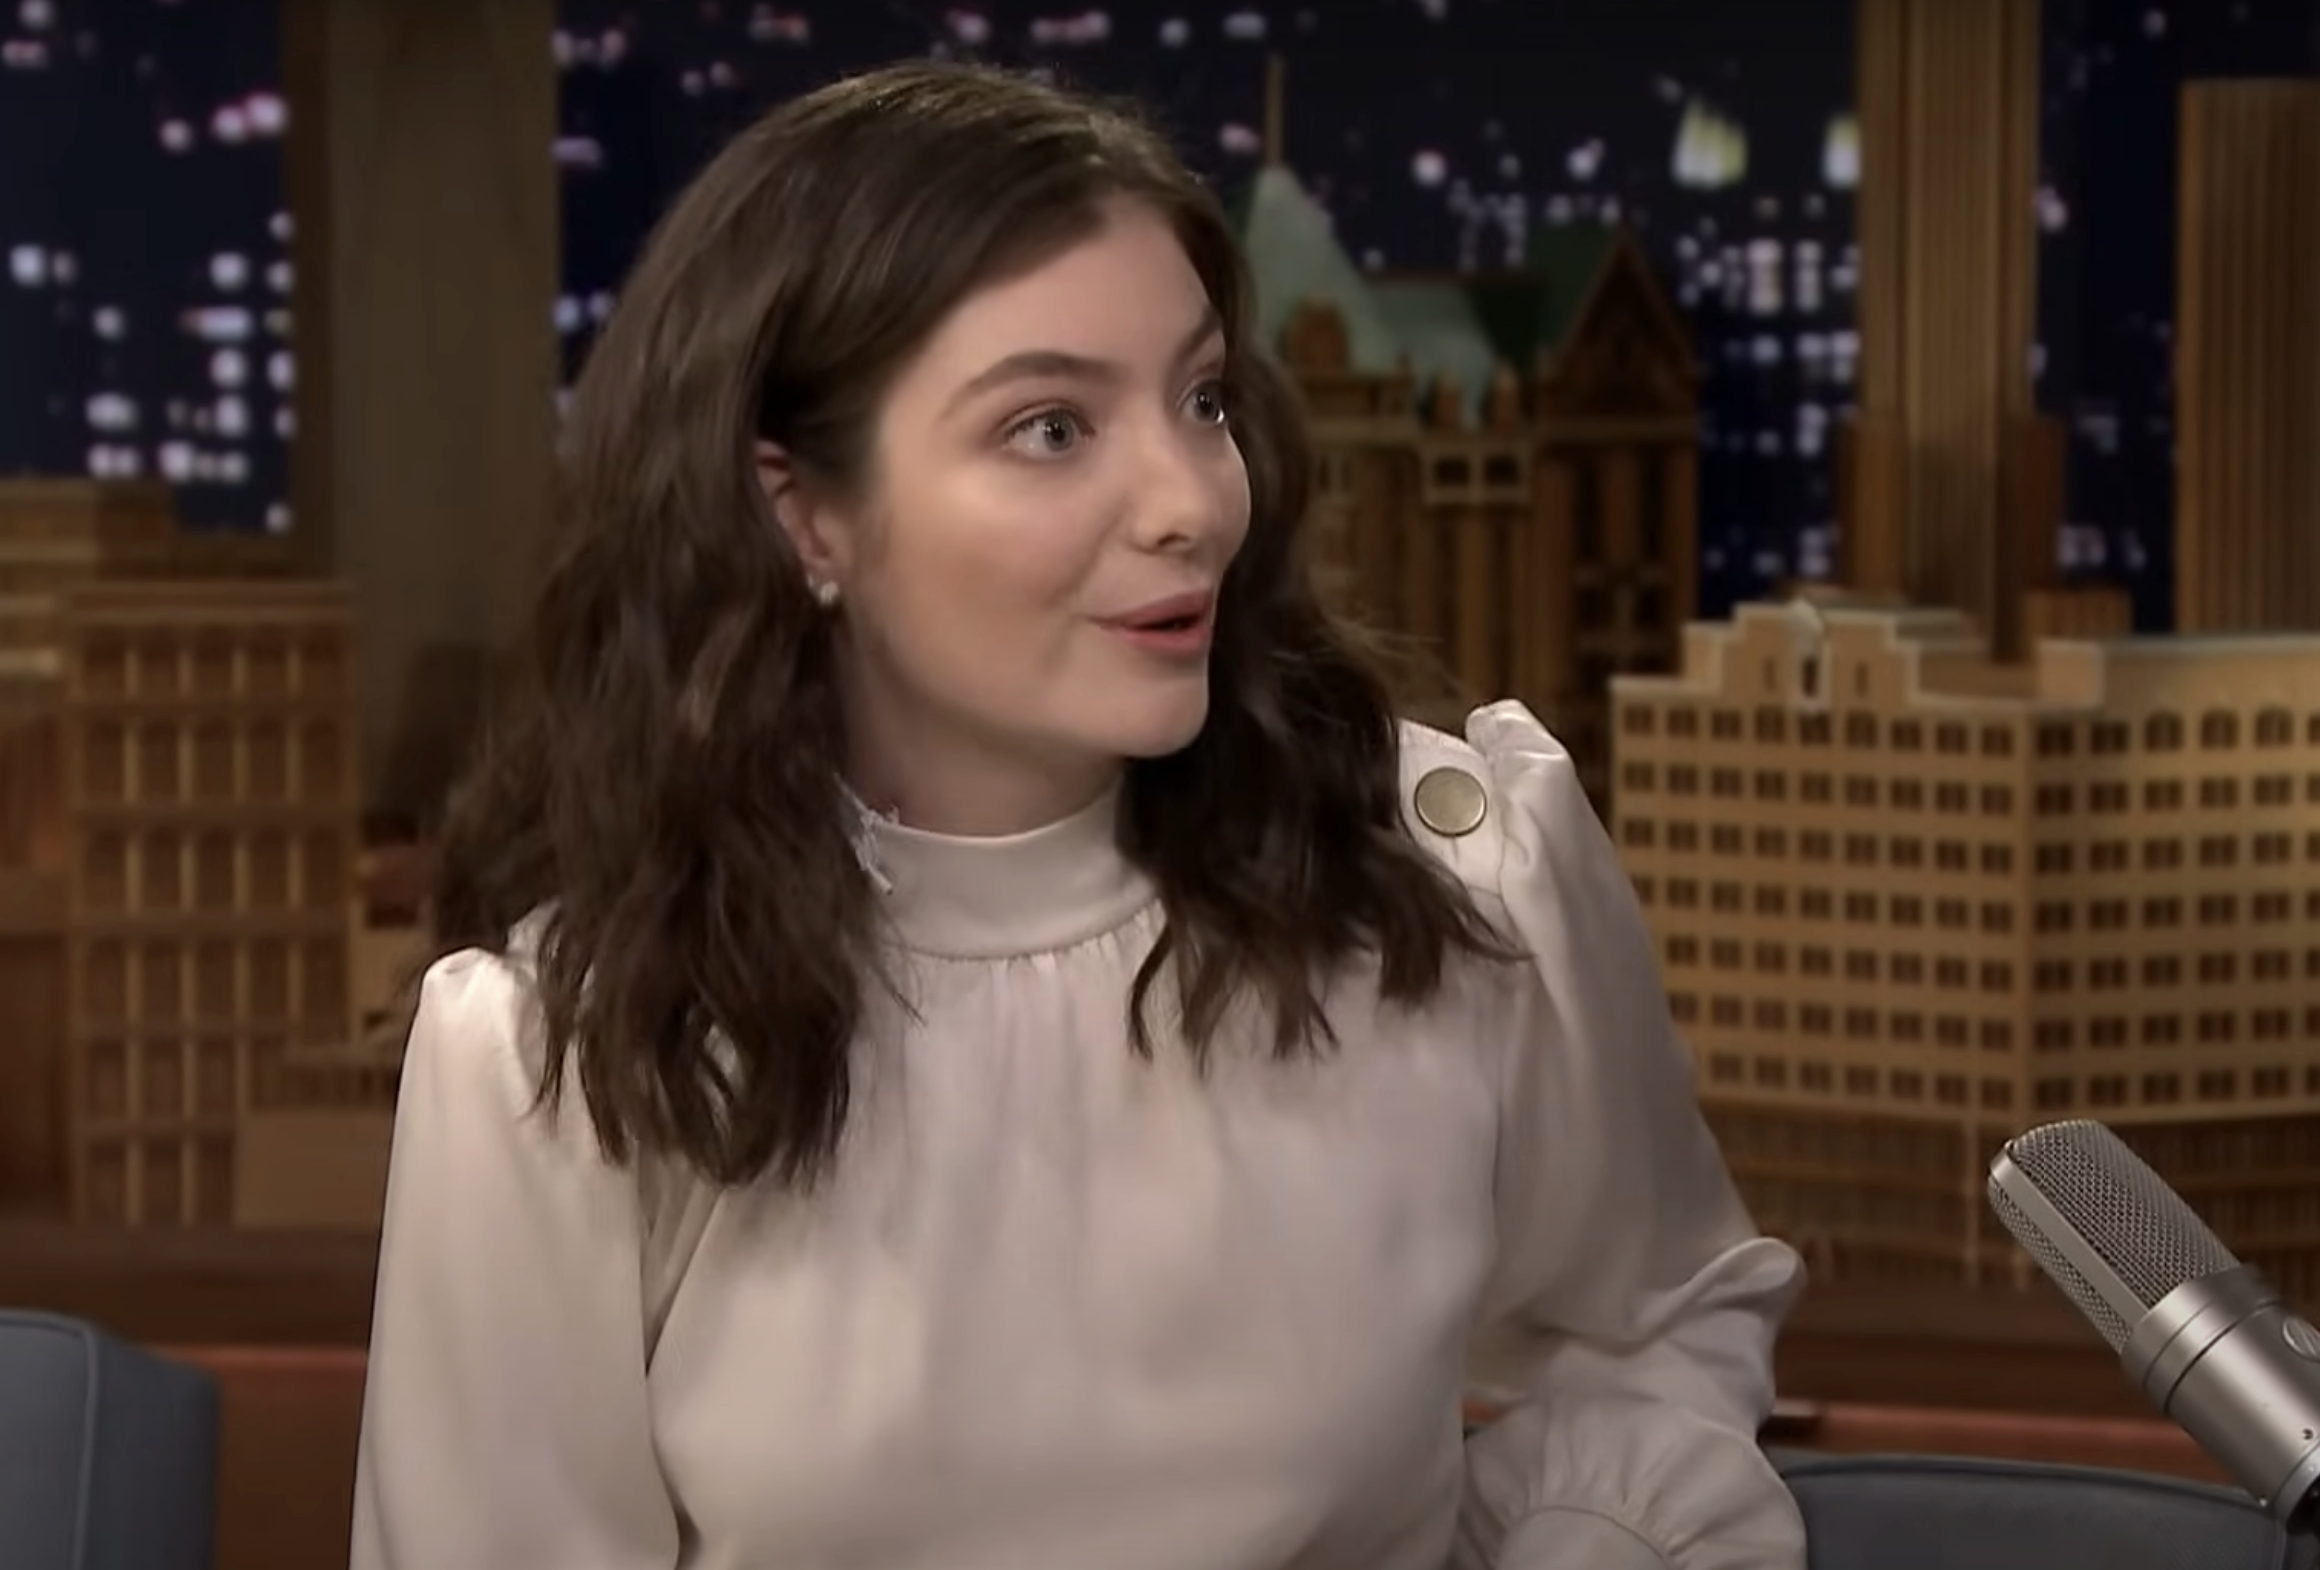 Lorde in light top on talk show, city backdrop, engaged in conversation